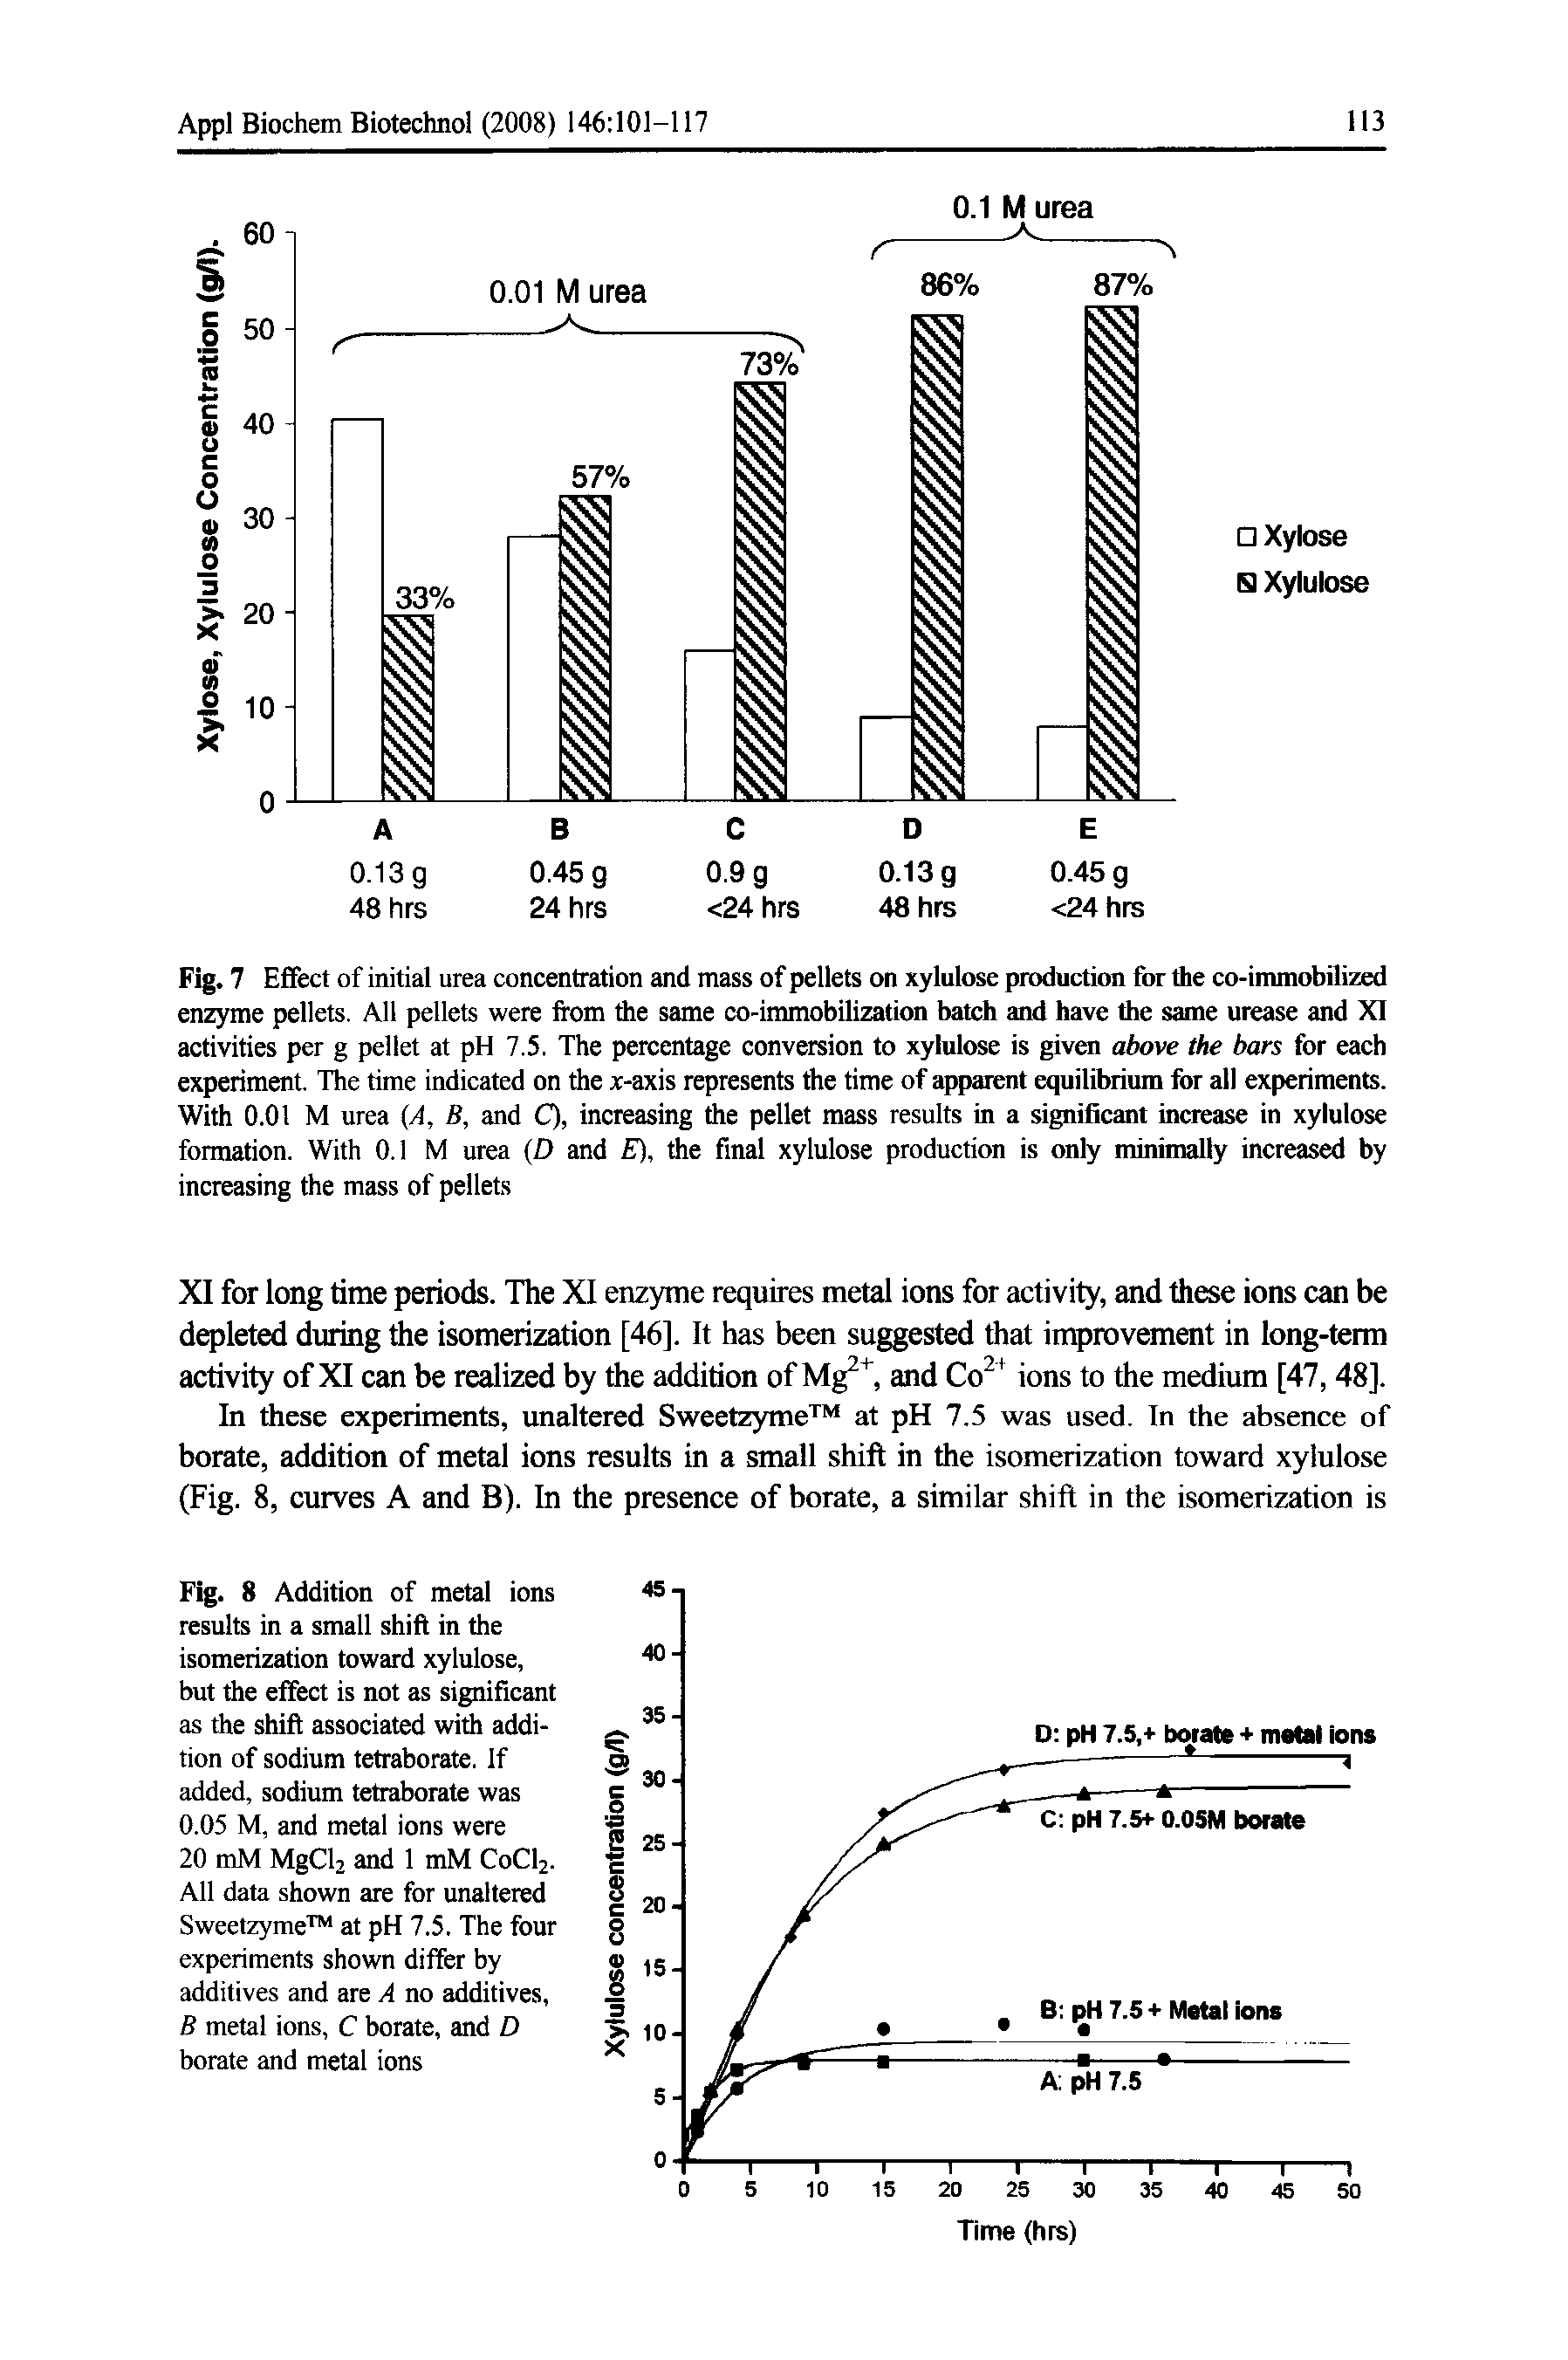 Fig. 7 Efifect of initial urea concentration and mass of pellets on xylulose production for the co-immobilized enzyme pellets. All pellets were from the same co-immobilization batch and have the same urease and XI activities per g pellet at pH 7.5. The percentage conversion to xylulose is given above the bars for each experiment. The time indicated on the x-axis represents the time of apparent equilibrium for all experiments. With 0.01 M urea (A, B, and C), increasing the pellet mass results in a significant increase in xylulose formation. With 0.1 M urea D and E), the final xylulose production is only minimally increased by increasing the mass of pellets...